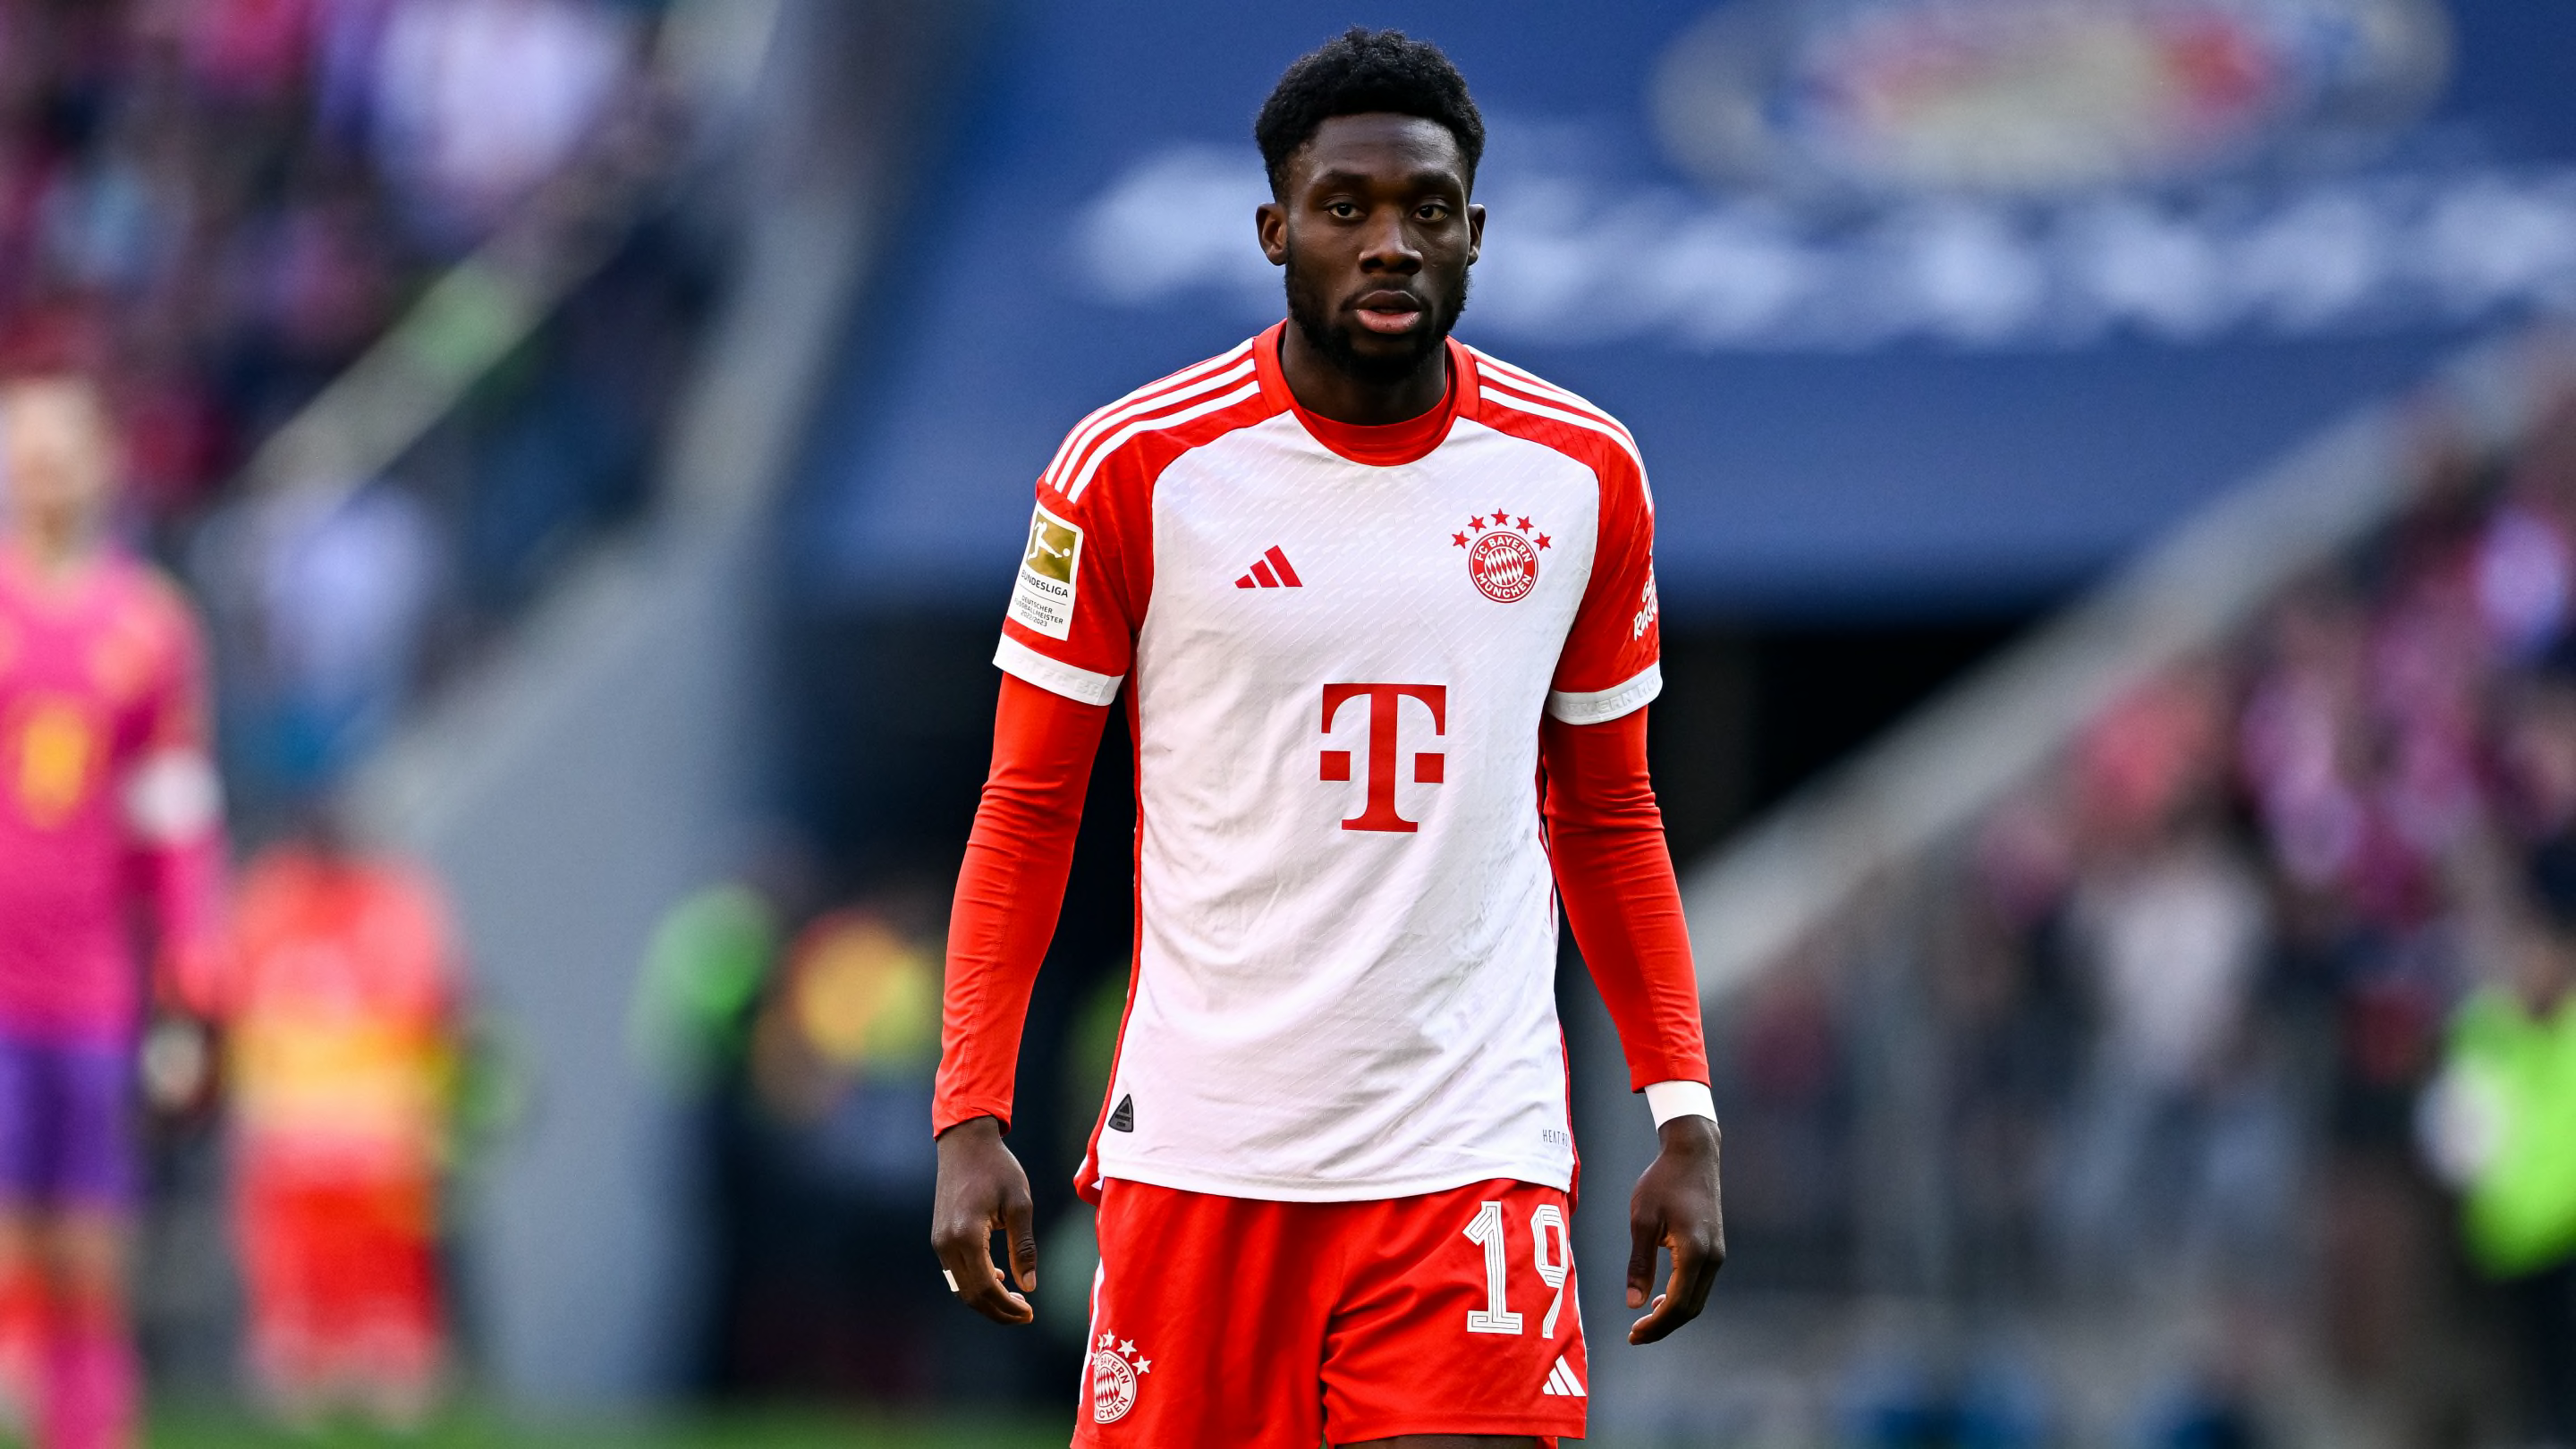 Bayern Munich's deadline for Alphonso Davies contract decision revealed - report